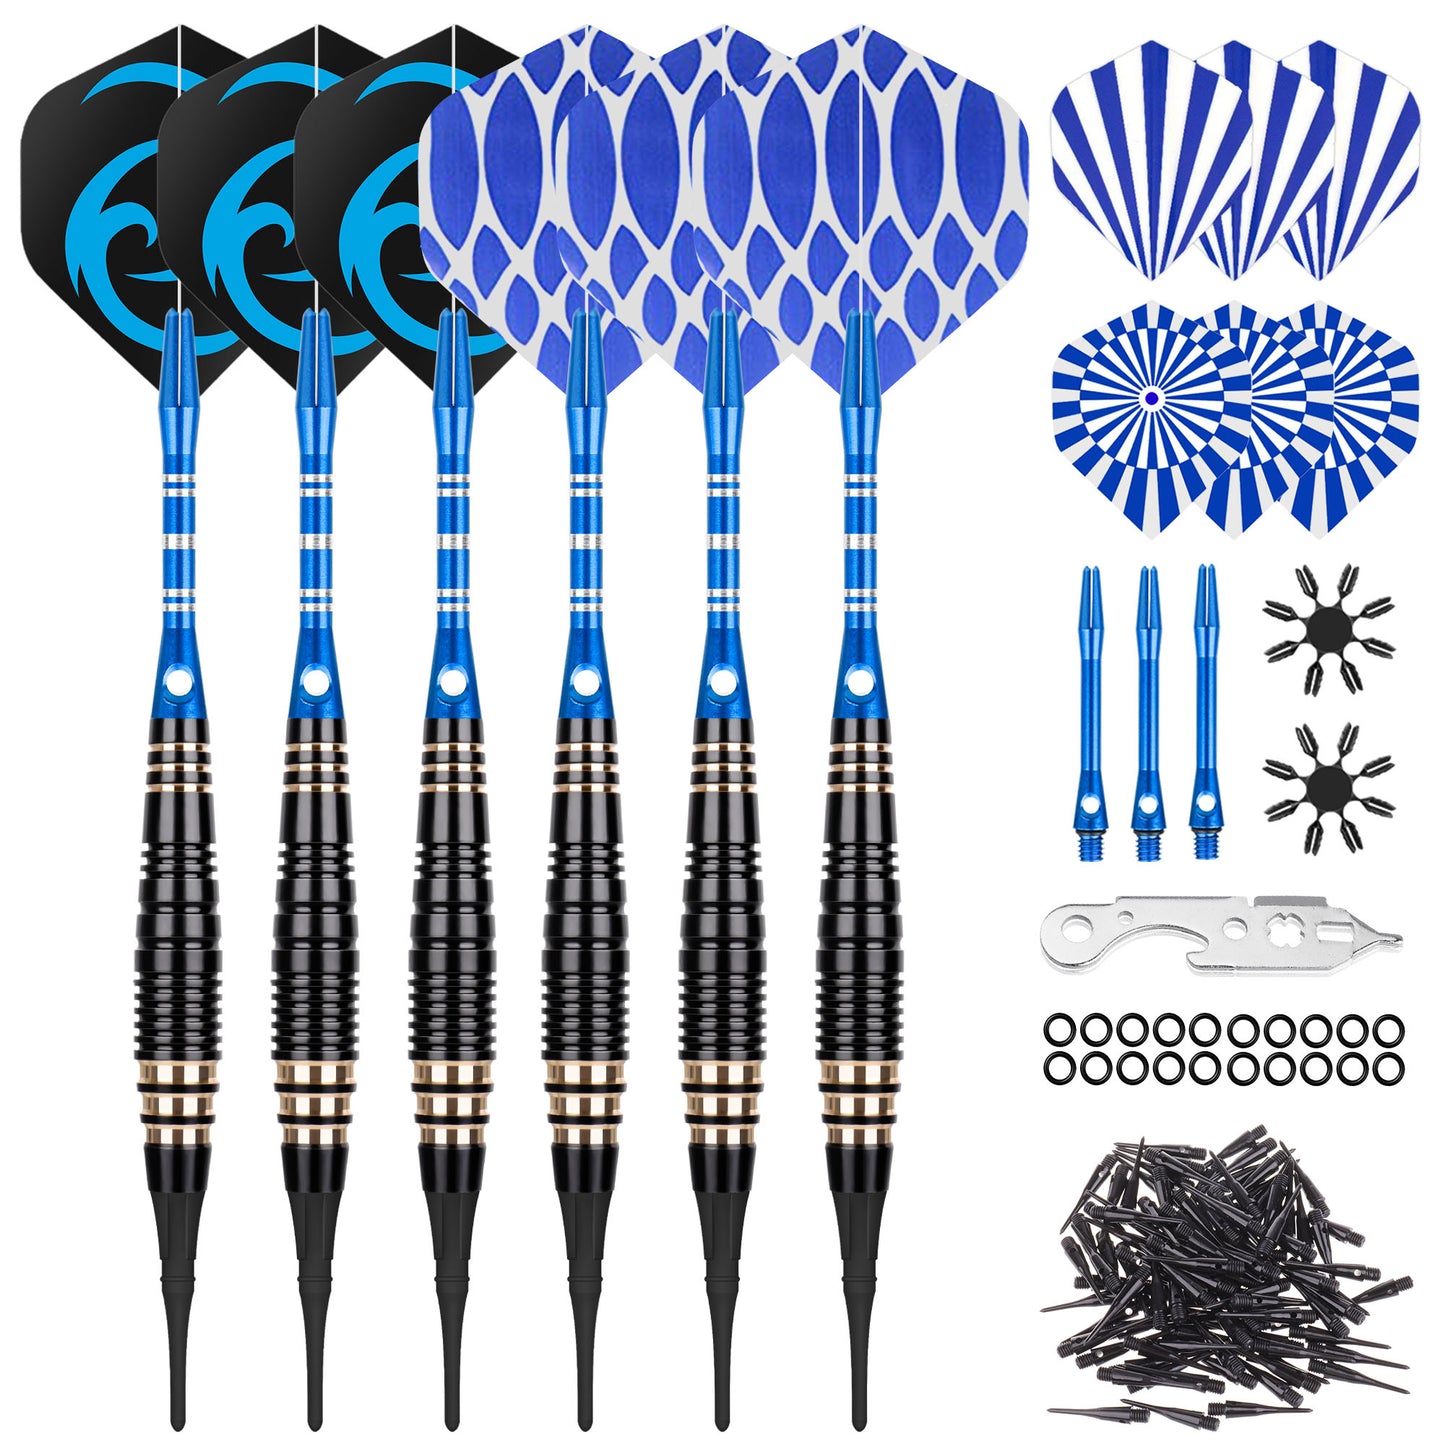 STEEL TIP DARTS BRASS SET 24G WITH CARRY CASE 6Pcs